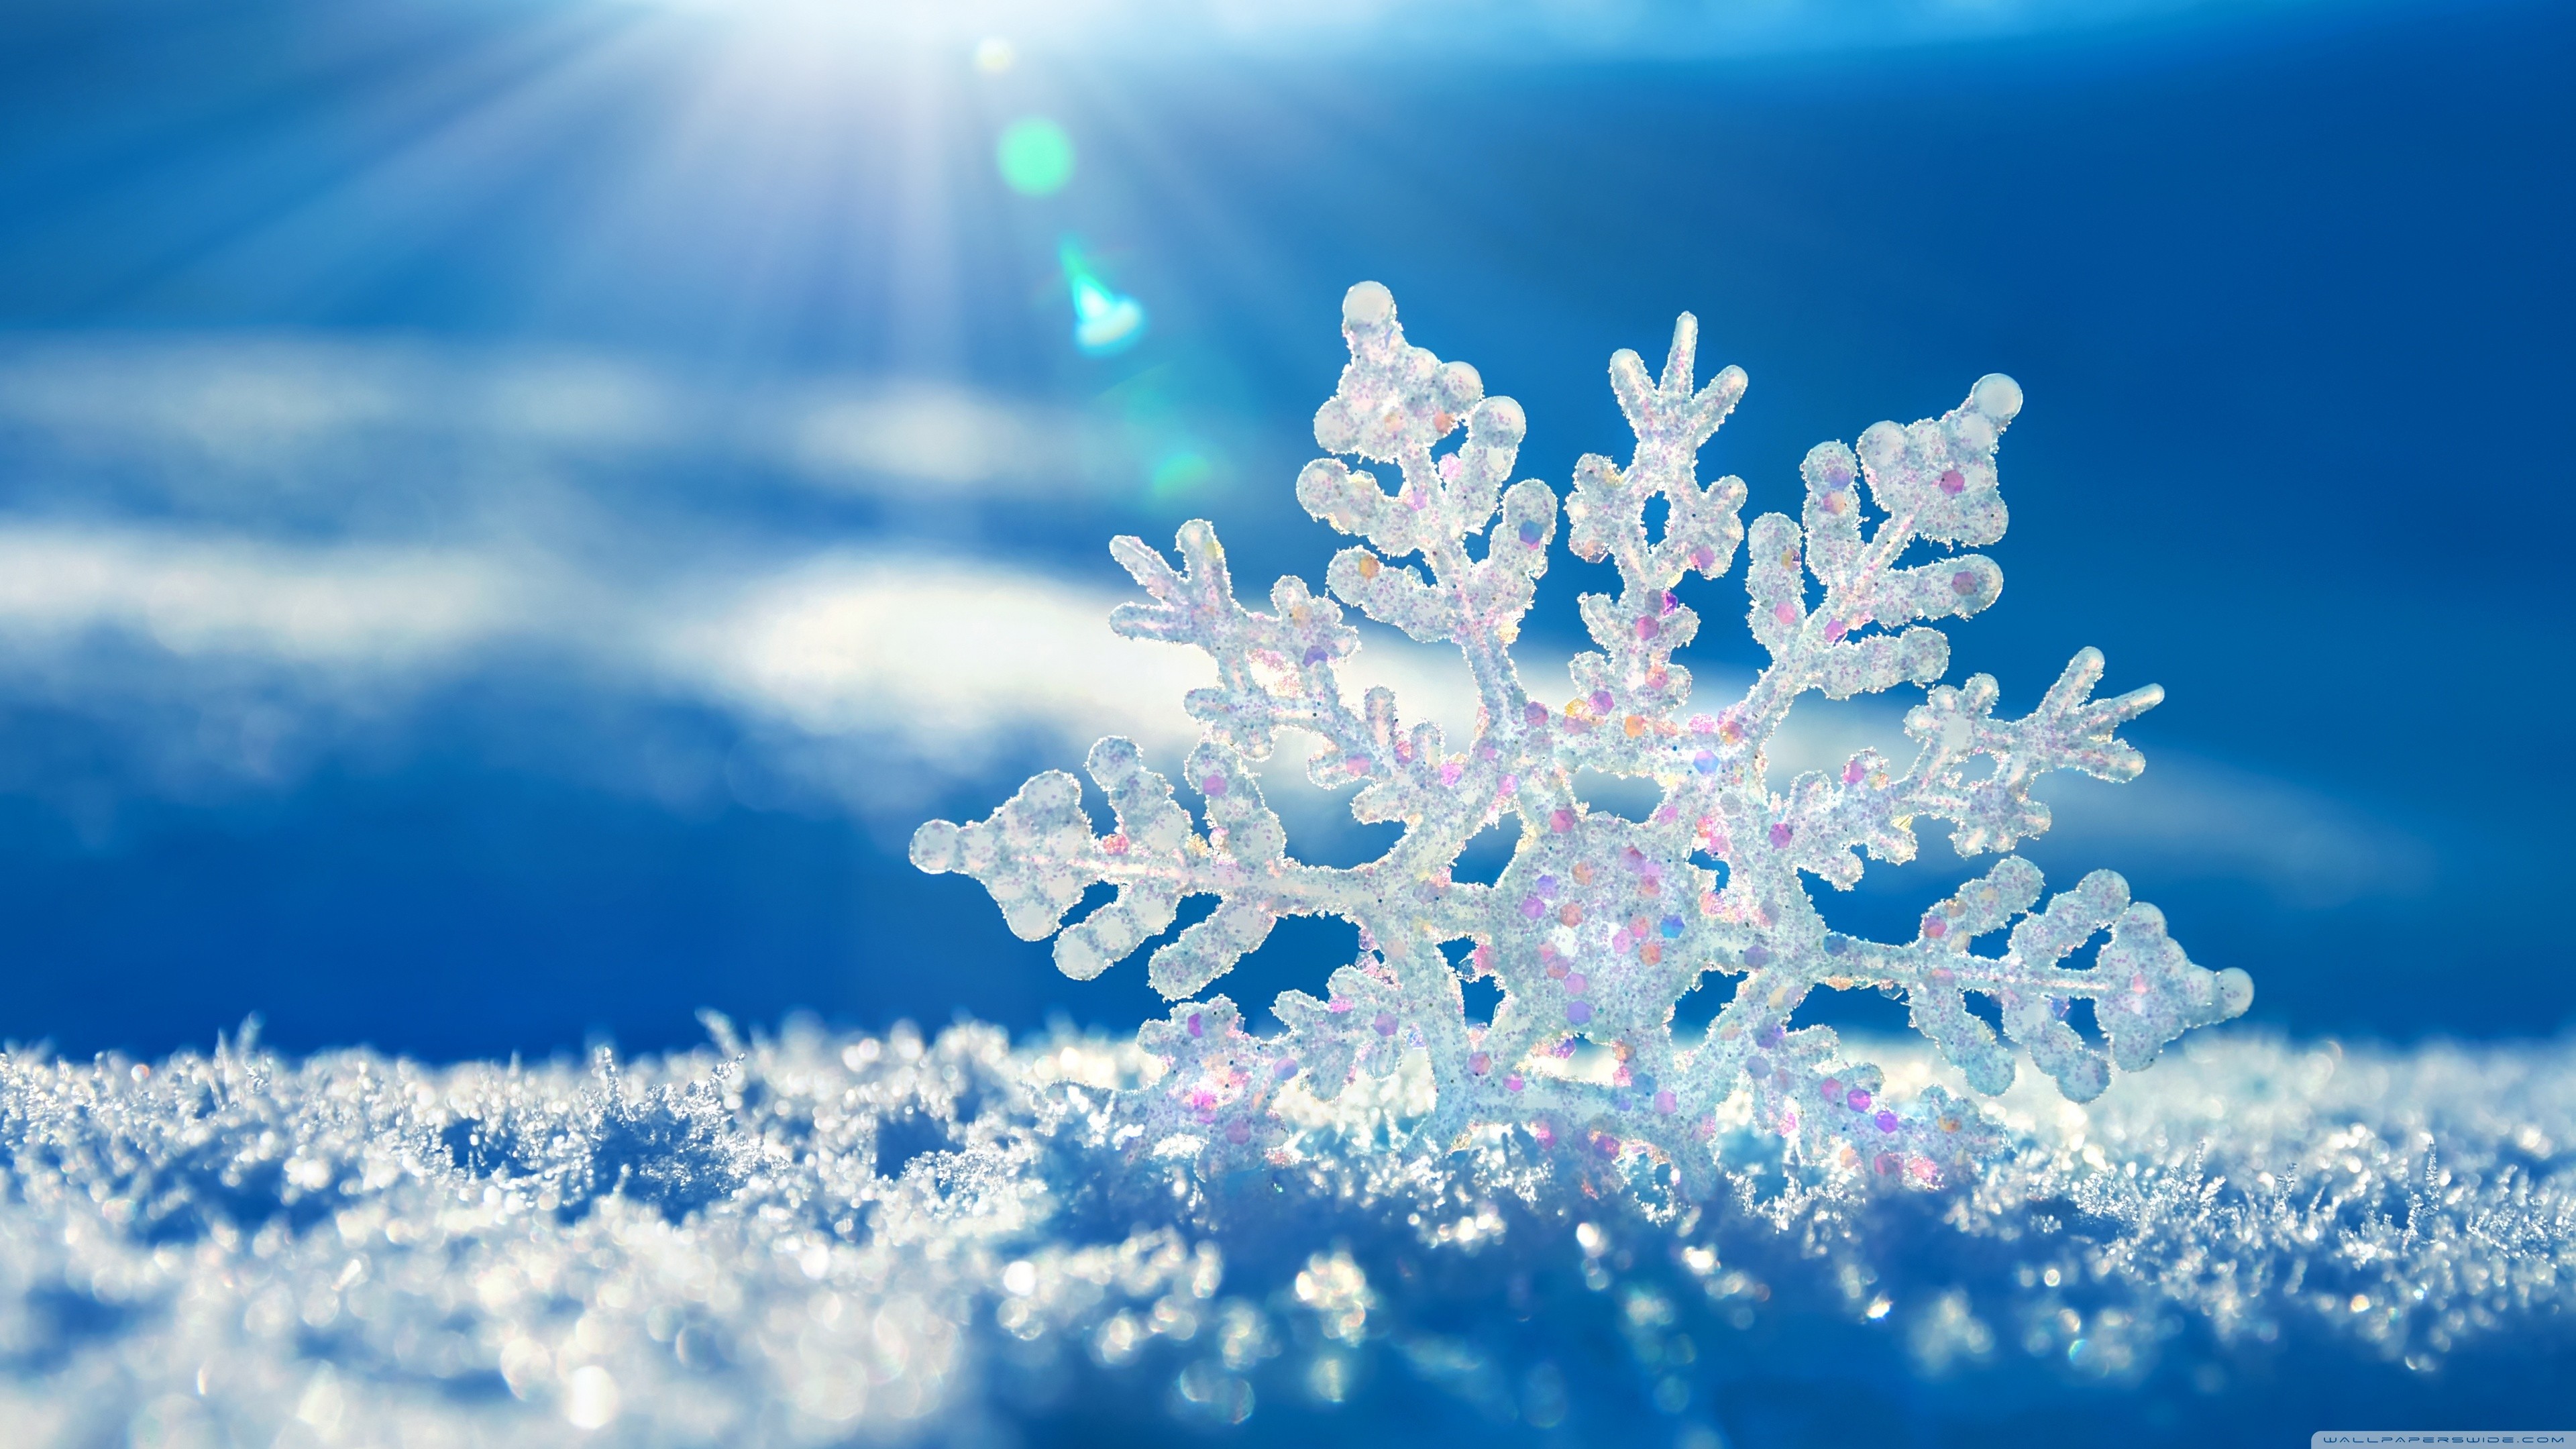 General 3840x2160 snowflakes winter macro snow blue background frost cold ice sunlight Ice crystals